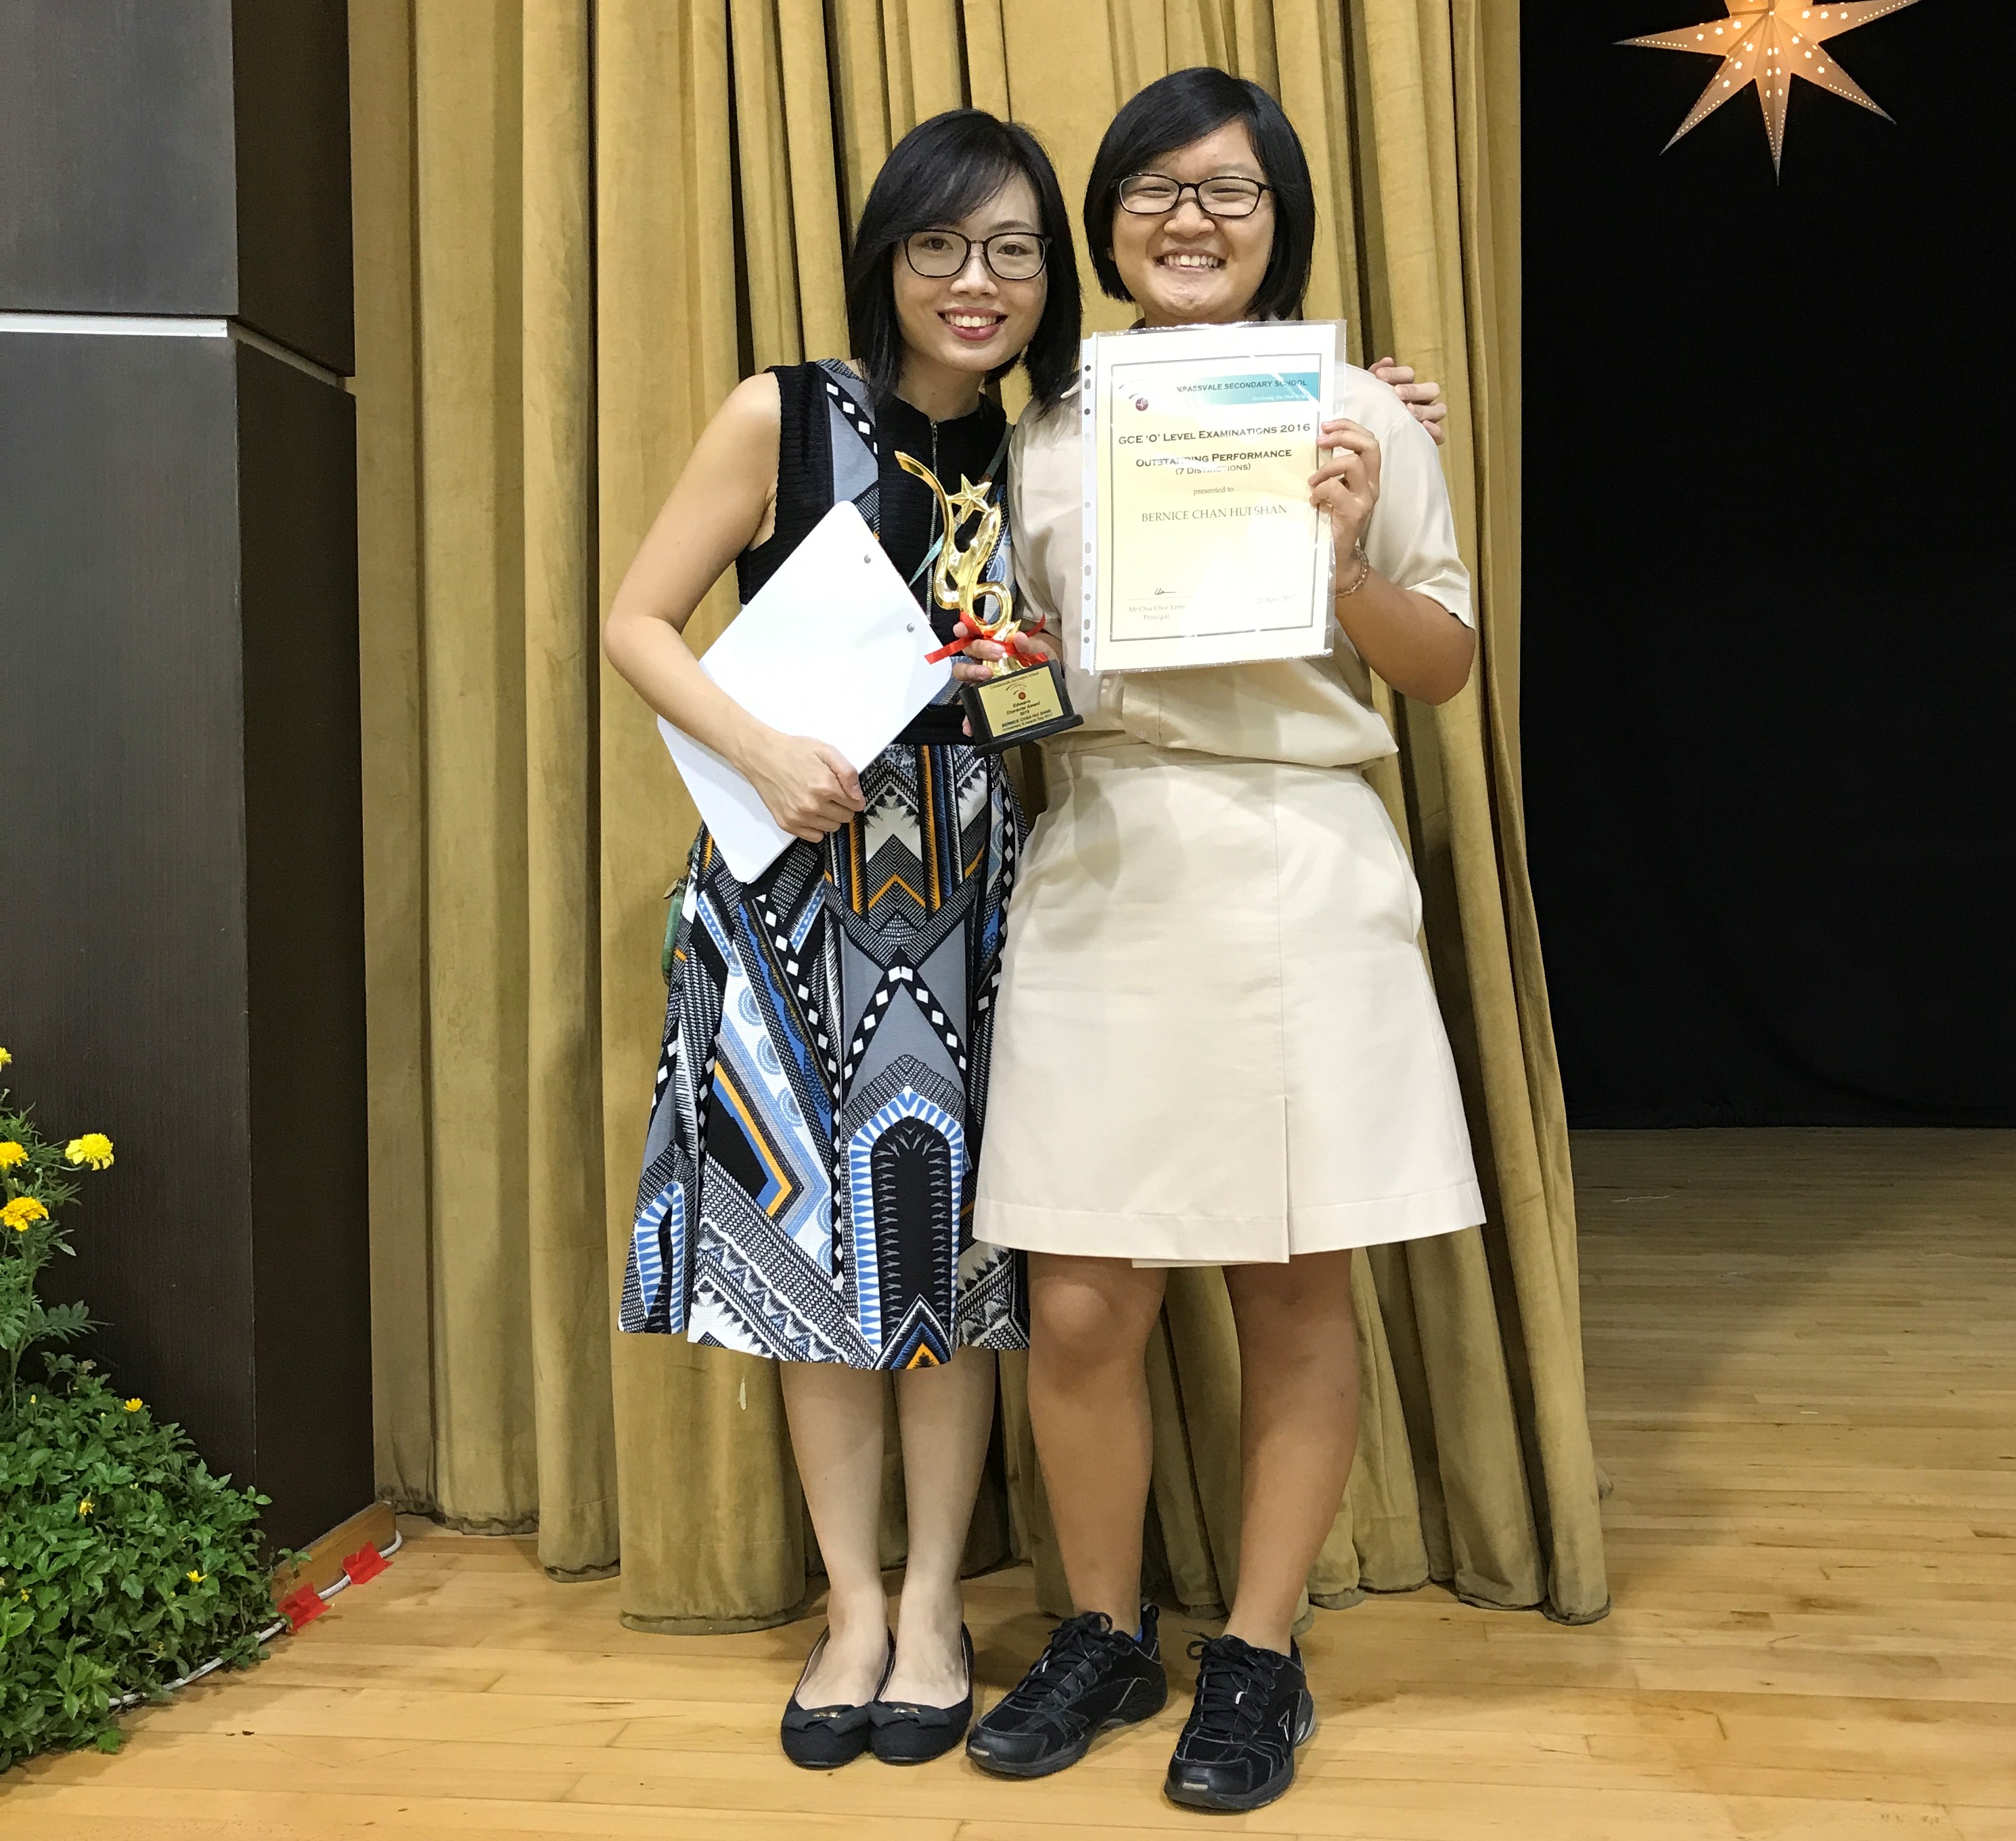 Ms Koh Bee Choo with Bernice Chan, the student she inspired to become a teacher. (Photo taken before COVID-19.)